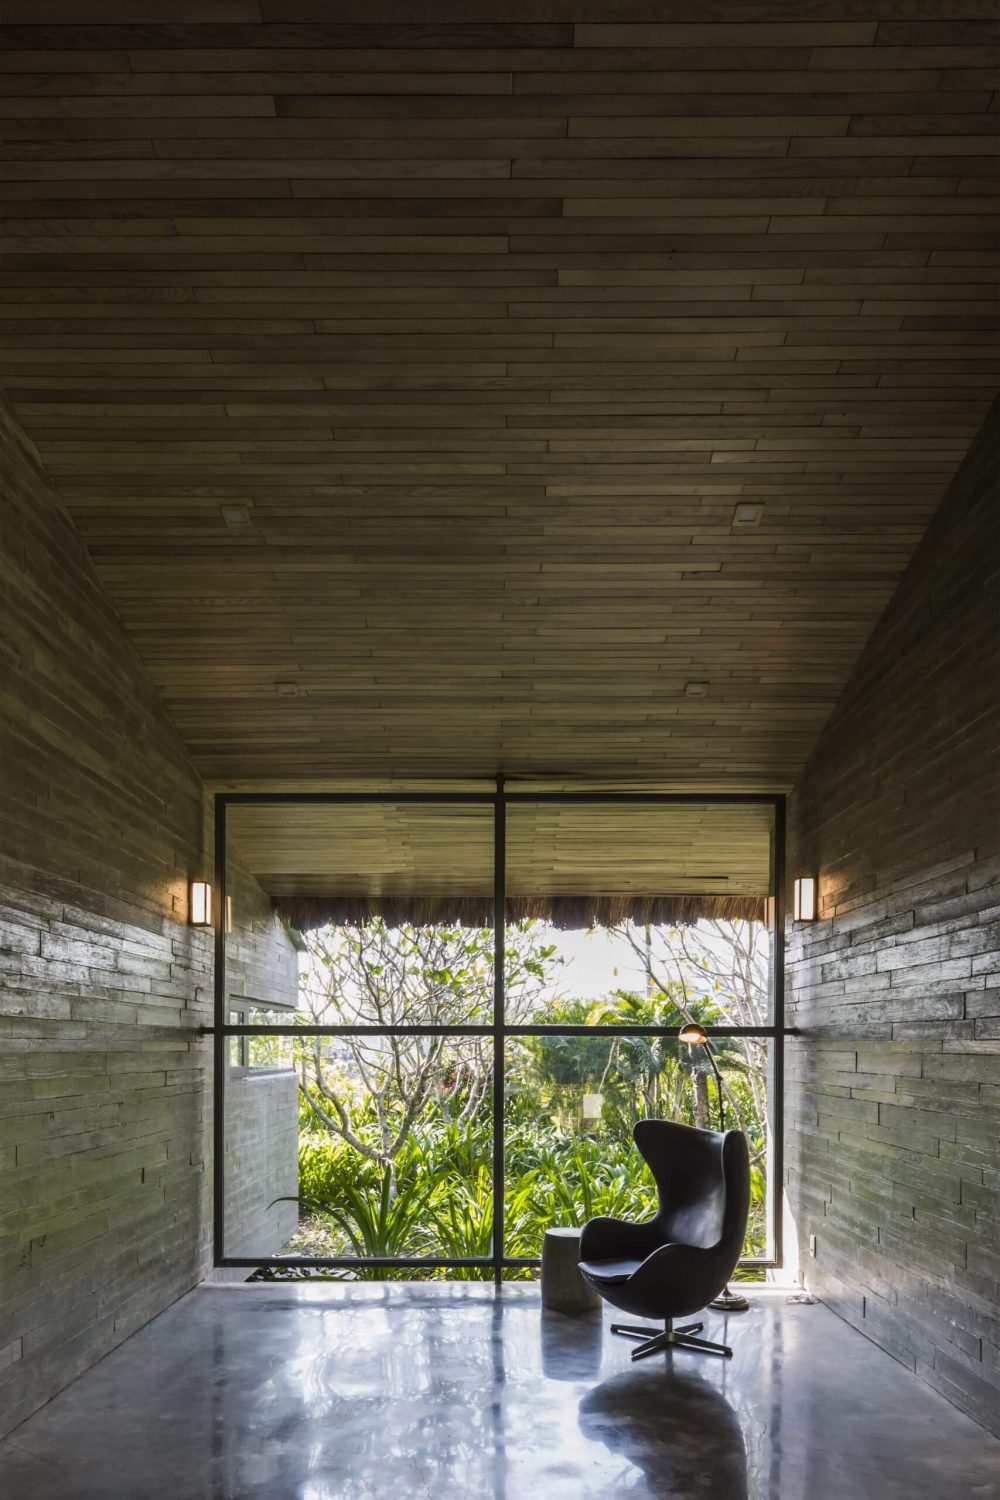 Am House | Garden House with Thatched Roof in Vietnam